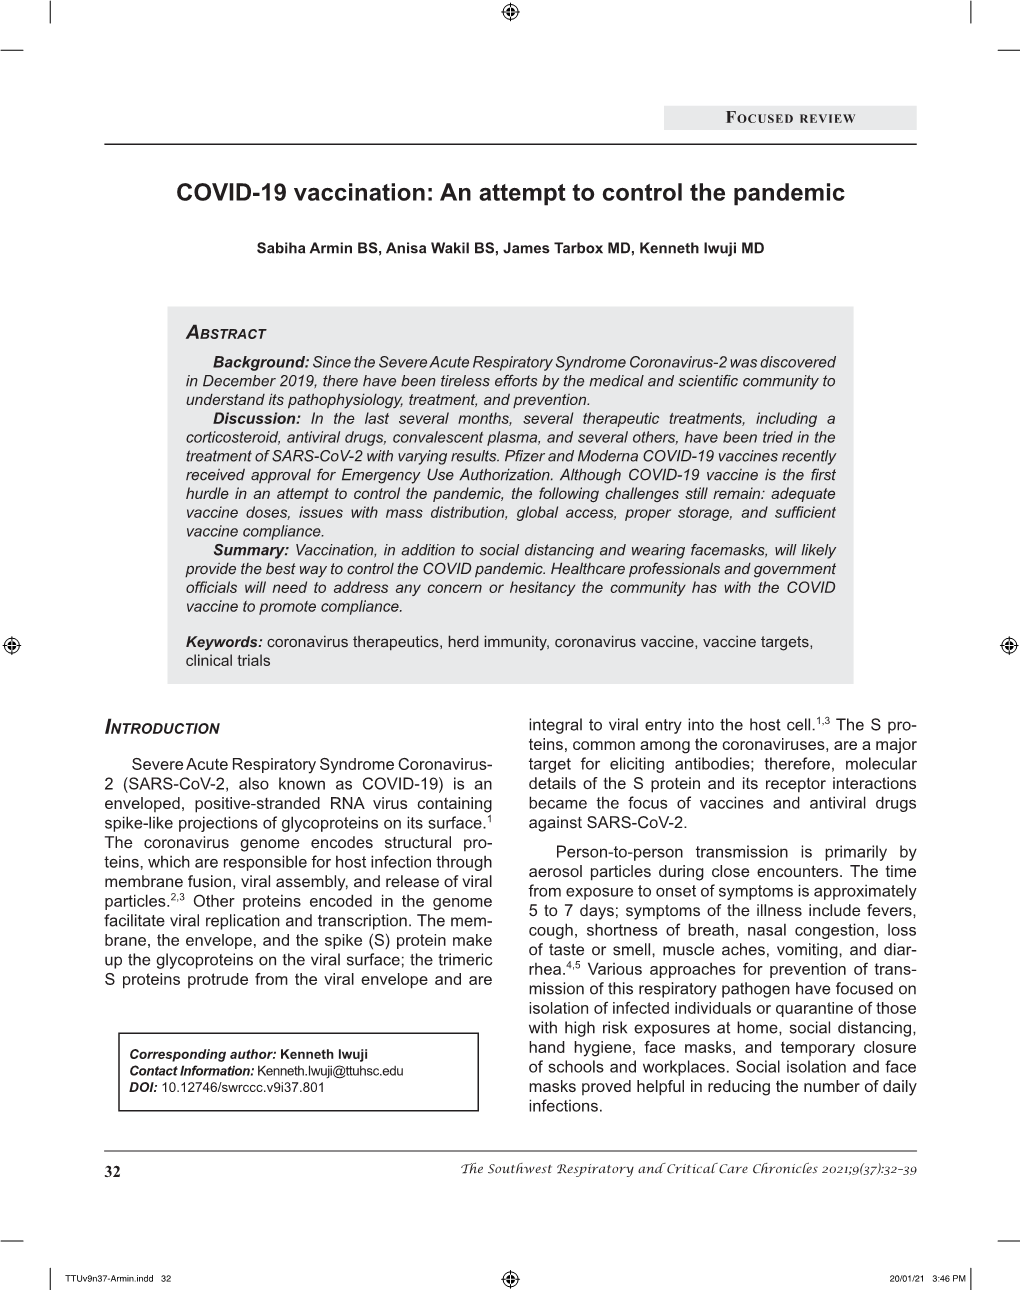 COVID-19 Vaccination: an Attempt to Control the Pandemic